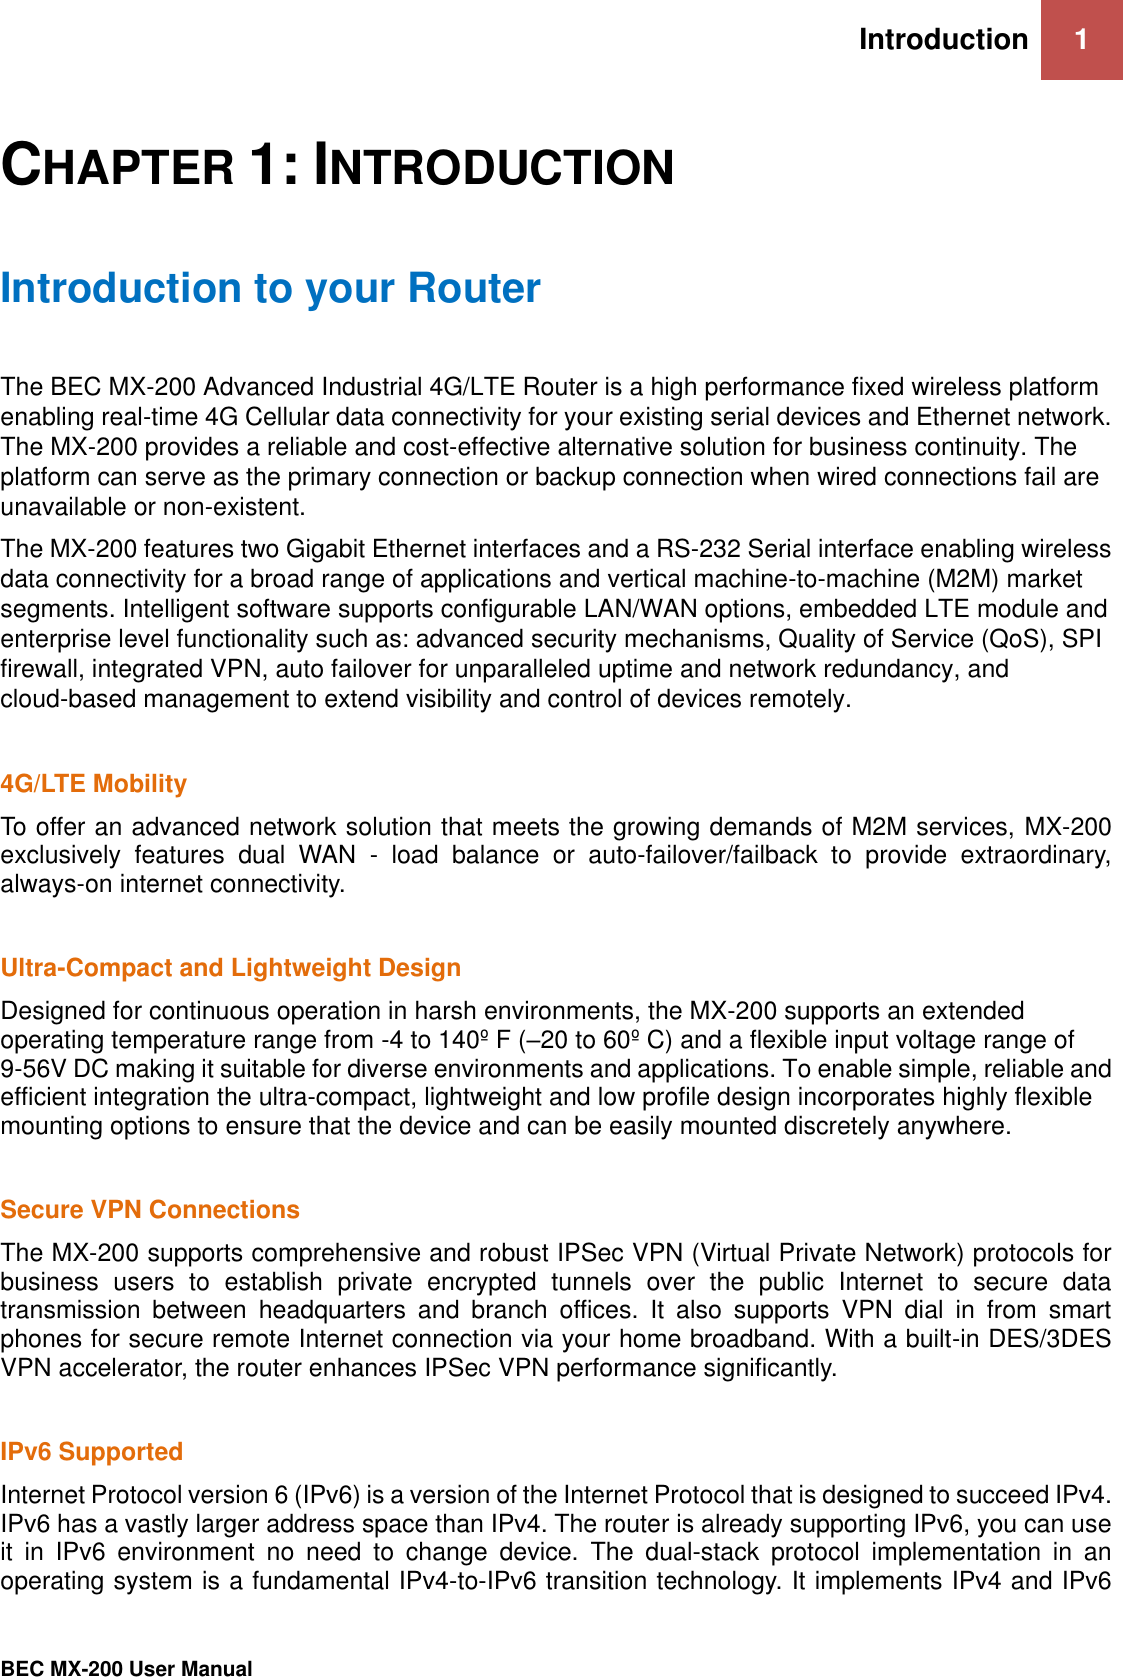 Introduction 1   BEC MX-200 User Manual  CHAPTER 1: INTRODUCTION Introduction to your Router The BEC MX-200 Advanced Industrial 4G/LTE Router is a high performance fixed wireless platform enabling real-time 4G Cellular data connectivity for your existing serial devices and Ethernet network. The MX-200 provides a reliable and cost-effective alternative solution for business continuity. The platform can serve as the primary connection or backup connection when wired connections fail are unavailable or non-existent. The MX-200 features two Gigabit Ethernet interfaces and a RS-232 Serial interface enabling wireless data connectivity for a broad range of applications and vertical machine-to-machine (M2M) market segments. Intelligent software supports configurable LAN/WAN options, embedded LTE module and enterprise level functionality such as: advanced security mechanisms, Quality of Service (QoS), SPI firewall, integrated VPN, auto failover for unparalleled uptime and network redundancy, and cloud-based management to extend visibility and control of devices remotely.  4G/LTE Mobility  To offer an advanced network solution that meets the growing demands of M2M services, MX-200 exclusively  features  dual  WAN  -  load  balance  or  auto-failover/failback  to  provide  extraordinary, always-on internet connectivity.    Ultra-Compact and Lightweight Design  Designed for continuous operation in harsh environments, the MX-200 supports an extended operating temperature range from -4 to 140º F (–20 to 60º C) and a flexible input voltage range of 9-56V DC making it suitable for diverse environments and applications. To enable simple, reliable and efficient integration the ultra-compact, lightweight and low profile design incorporates highly flexible mounting options to ensure that the device and can be easily mounted discretely anywhere.   Secure VPN Connections  The MX-200 supports comprehensive and robust IPSec VPN (Virtual Private Network) protocols for business  users  to  establish  private  encrypted  tunnels  over  the  public  Internet  to  secure  data transmission  between  headquarters  and  branch  offices.  It  also  supports  VPN  dial  in  from  smart phones for secure remote Internet connection via your home broadband. With a built-in DES/3DES VPN accelerator, the router enhances IPSec VPN performance significantly.  IPv6 Supported Internet Protocol version 6 (IPv6) is a version of the Internet Protocol that is designed to succeed IPv4. IPv6 has a vastly larger address space than IPv4. The router is already supporting IPv6, you can use it  in  IPv6  environment  no  need  to  change  device.  The  dual-stack  protocol  implementation  in  an operating system is a fundamental IPv4-to-IPv6 transition technology. It implements IPv4 and IPv6 